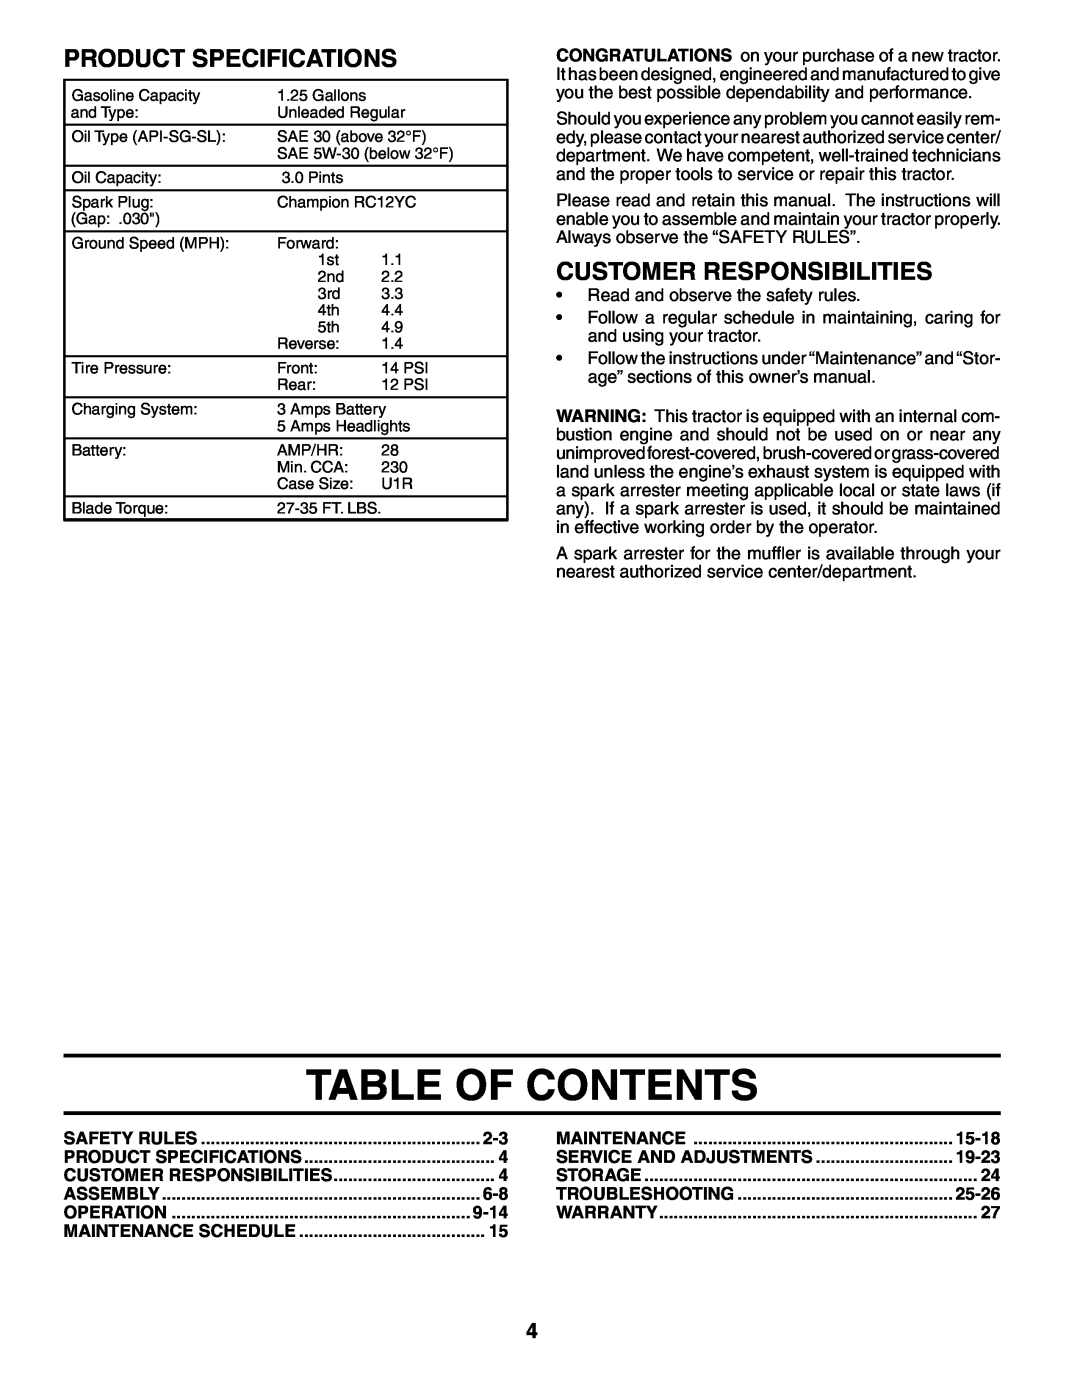 Weed Eater 195383 manual Table Of Contents, Product Specifications, Customer Responsibilities 